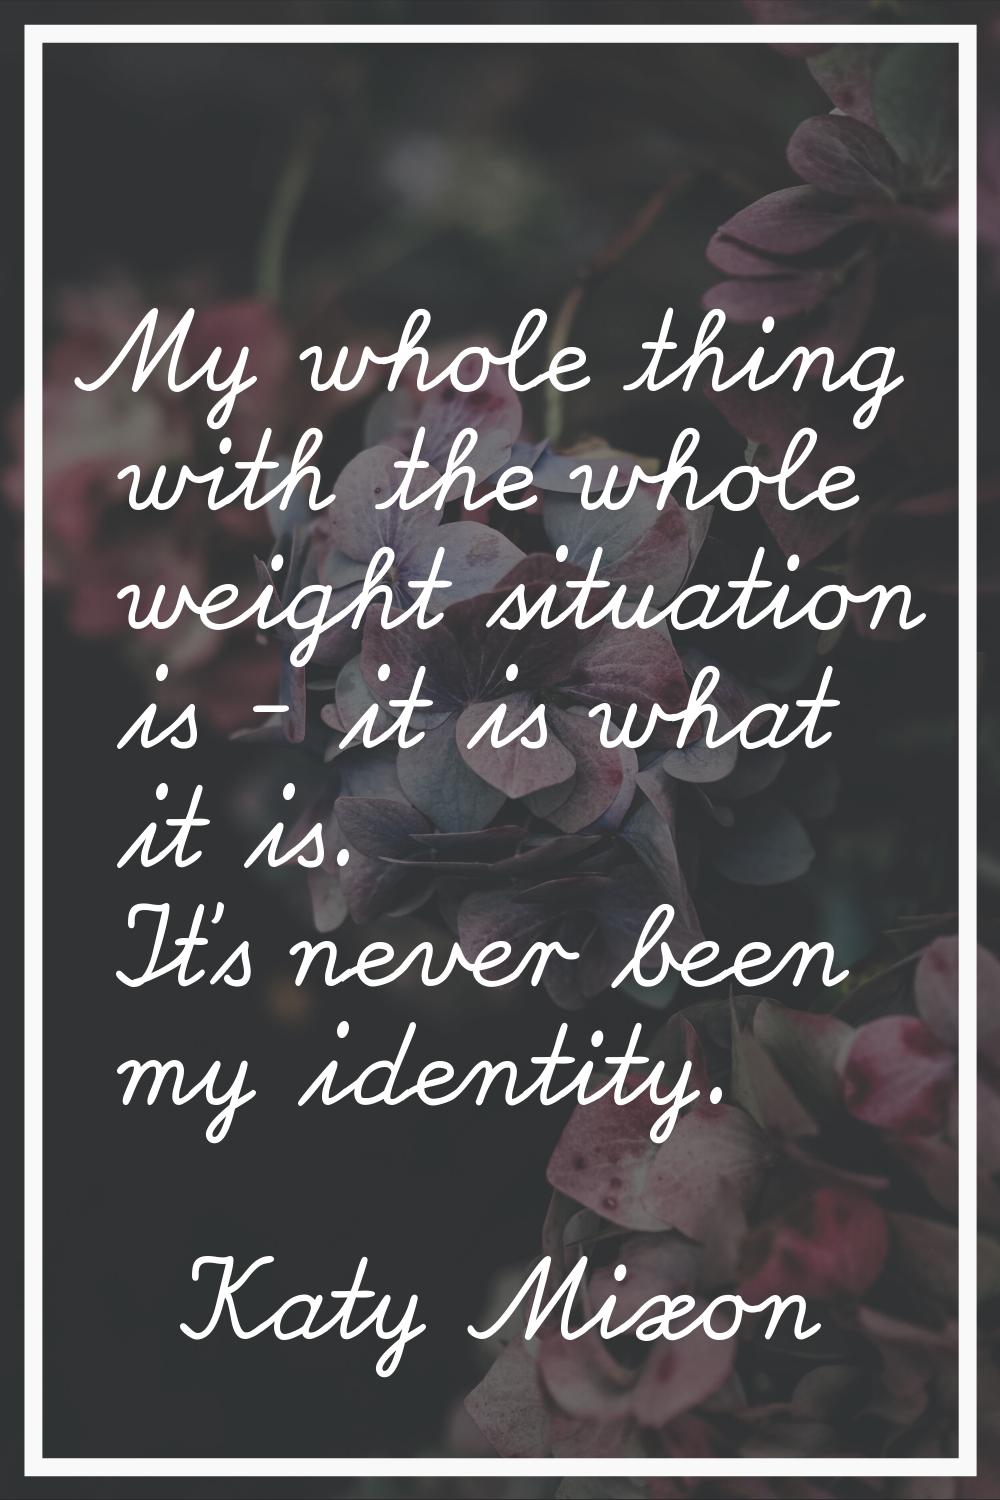 My whole thing with the whole weight situation is - it is what it is. It's never been my identity.